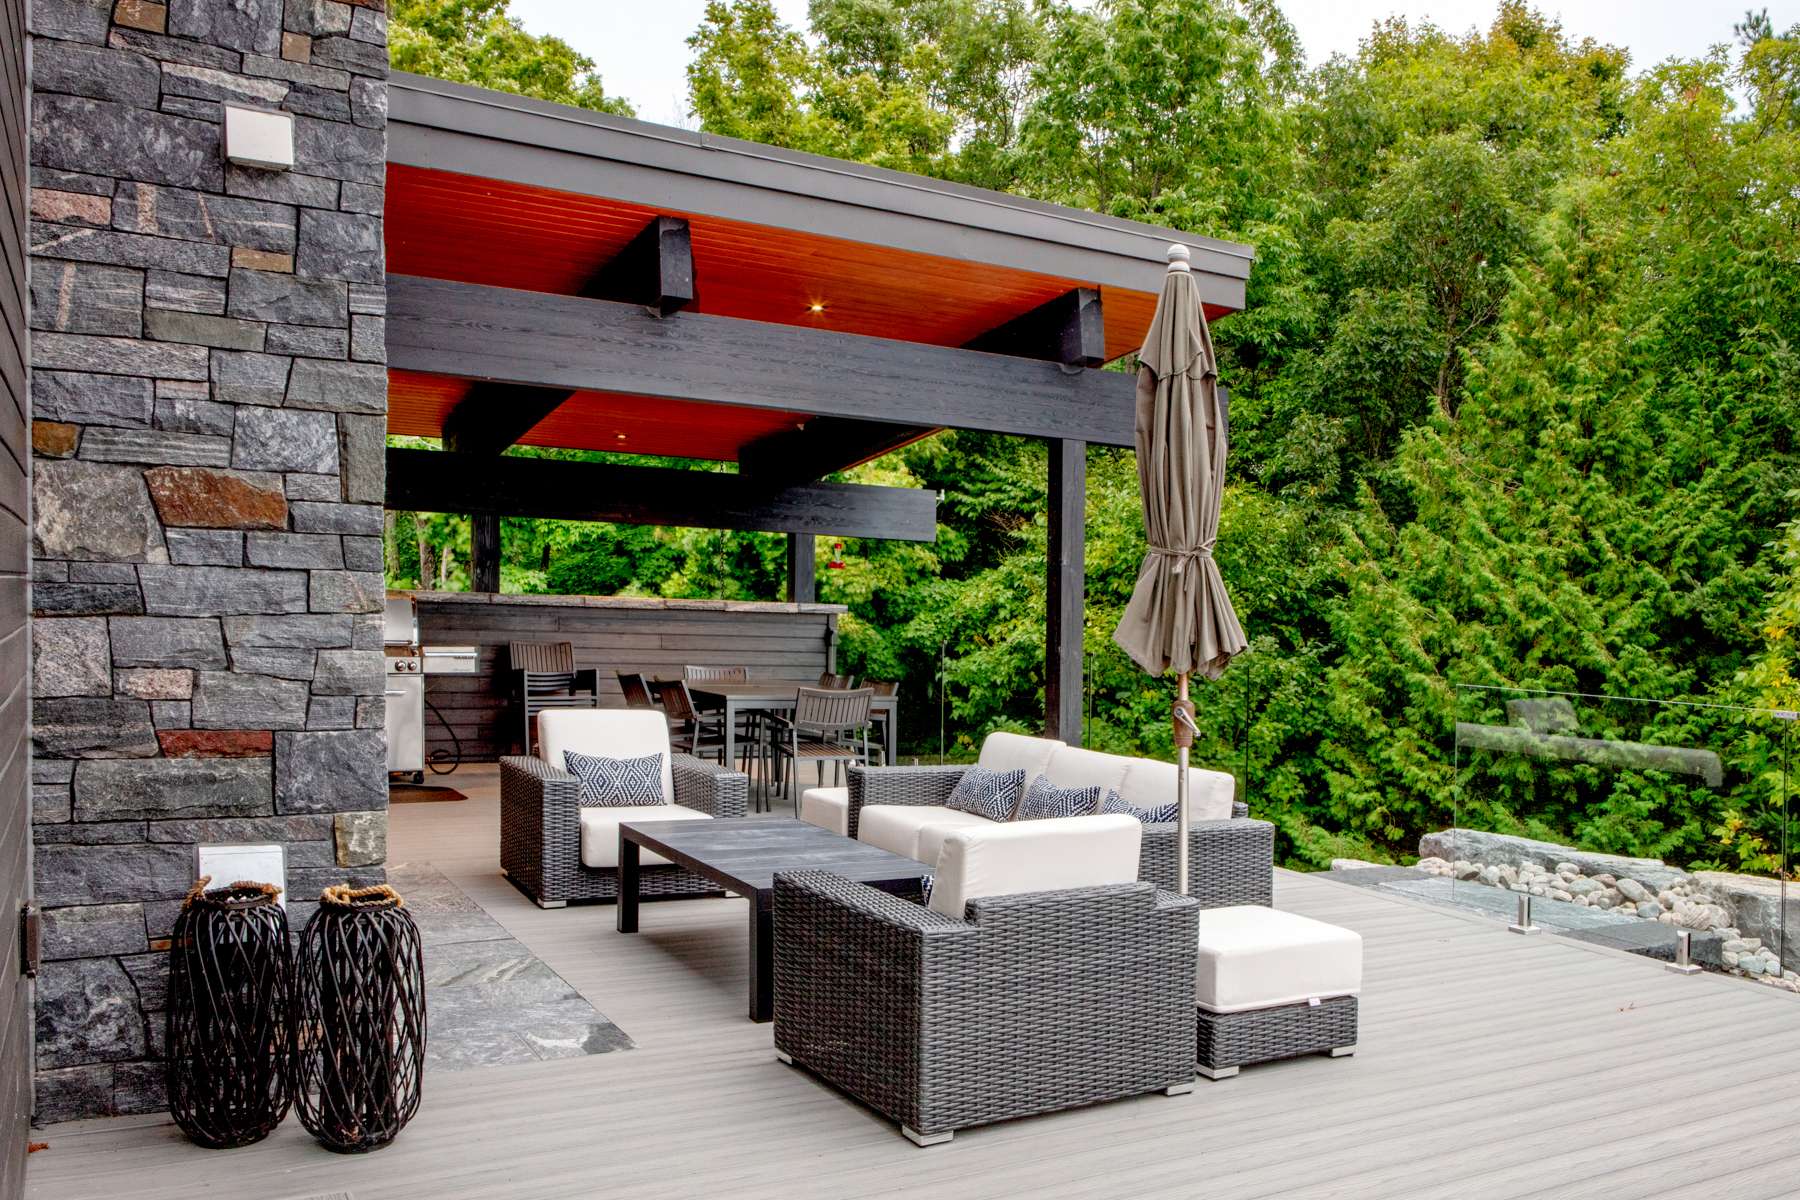 Outdoor seating area | Ballantyne Builds